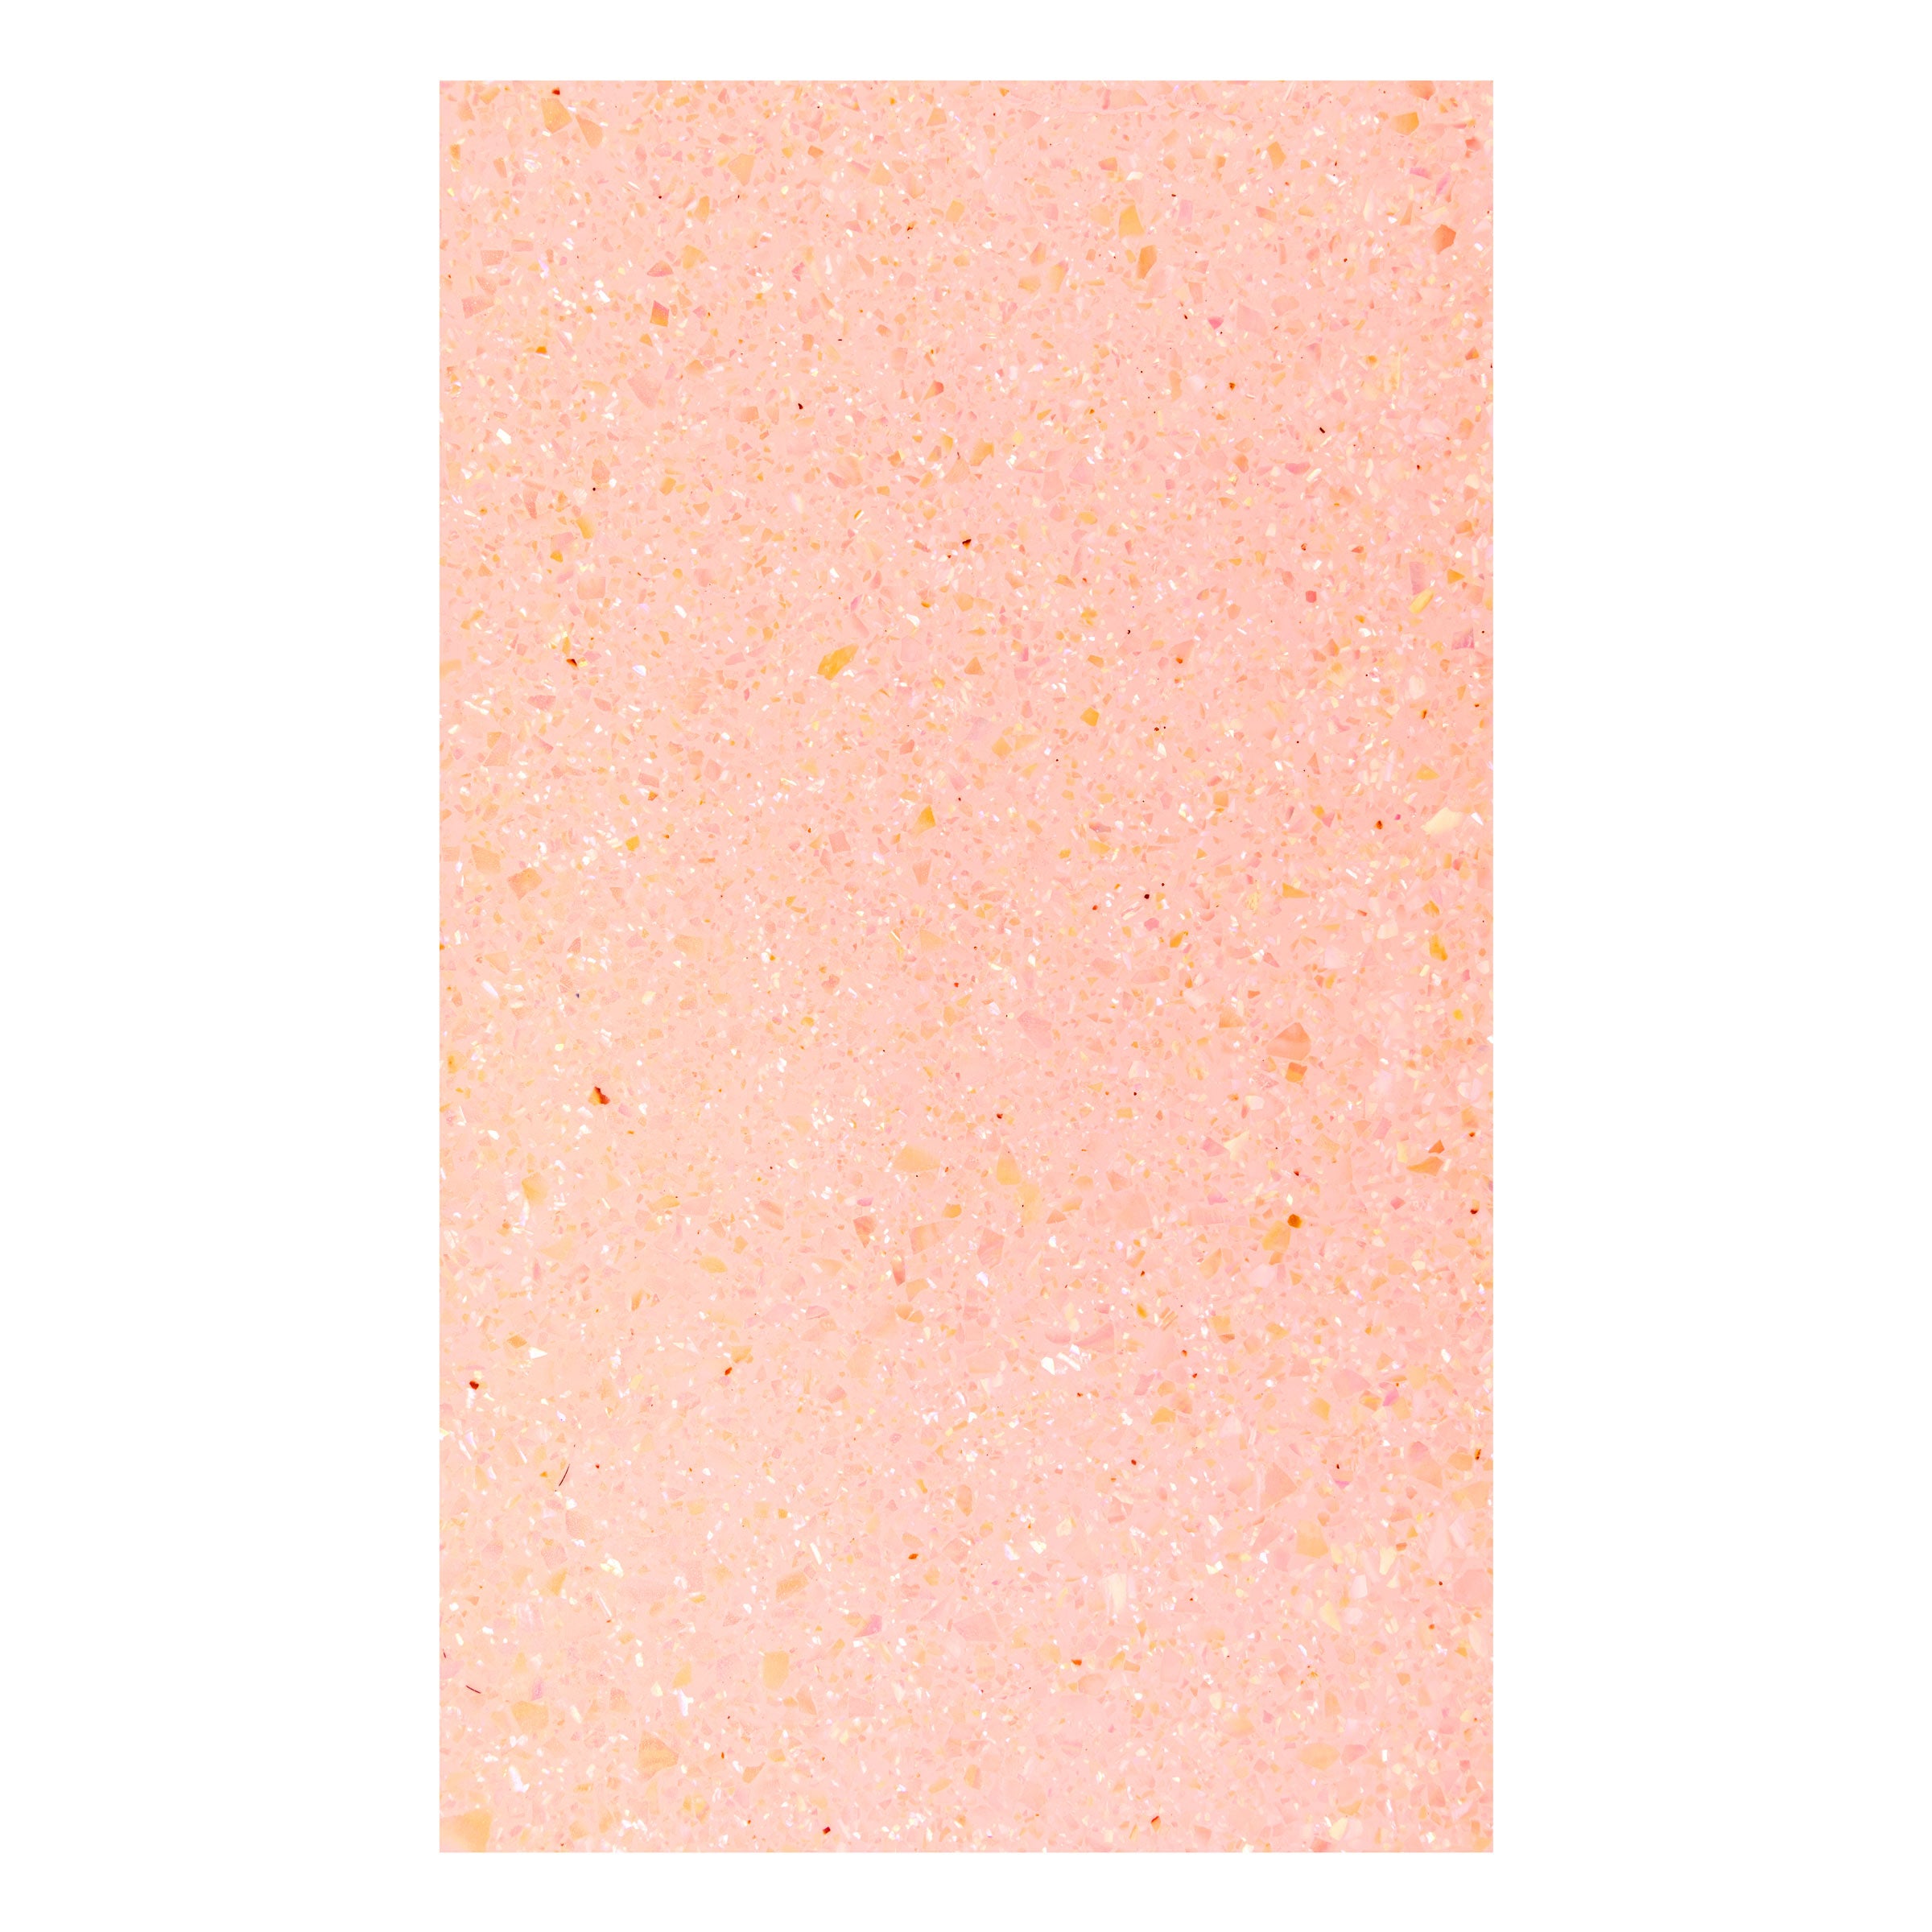 #color_star flake pink pearl